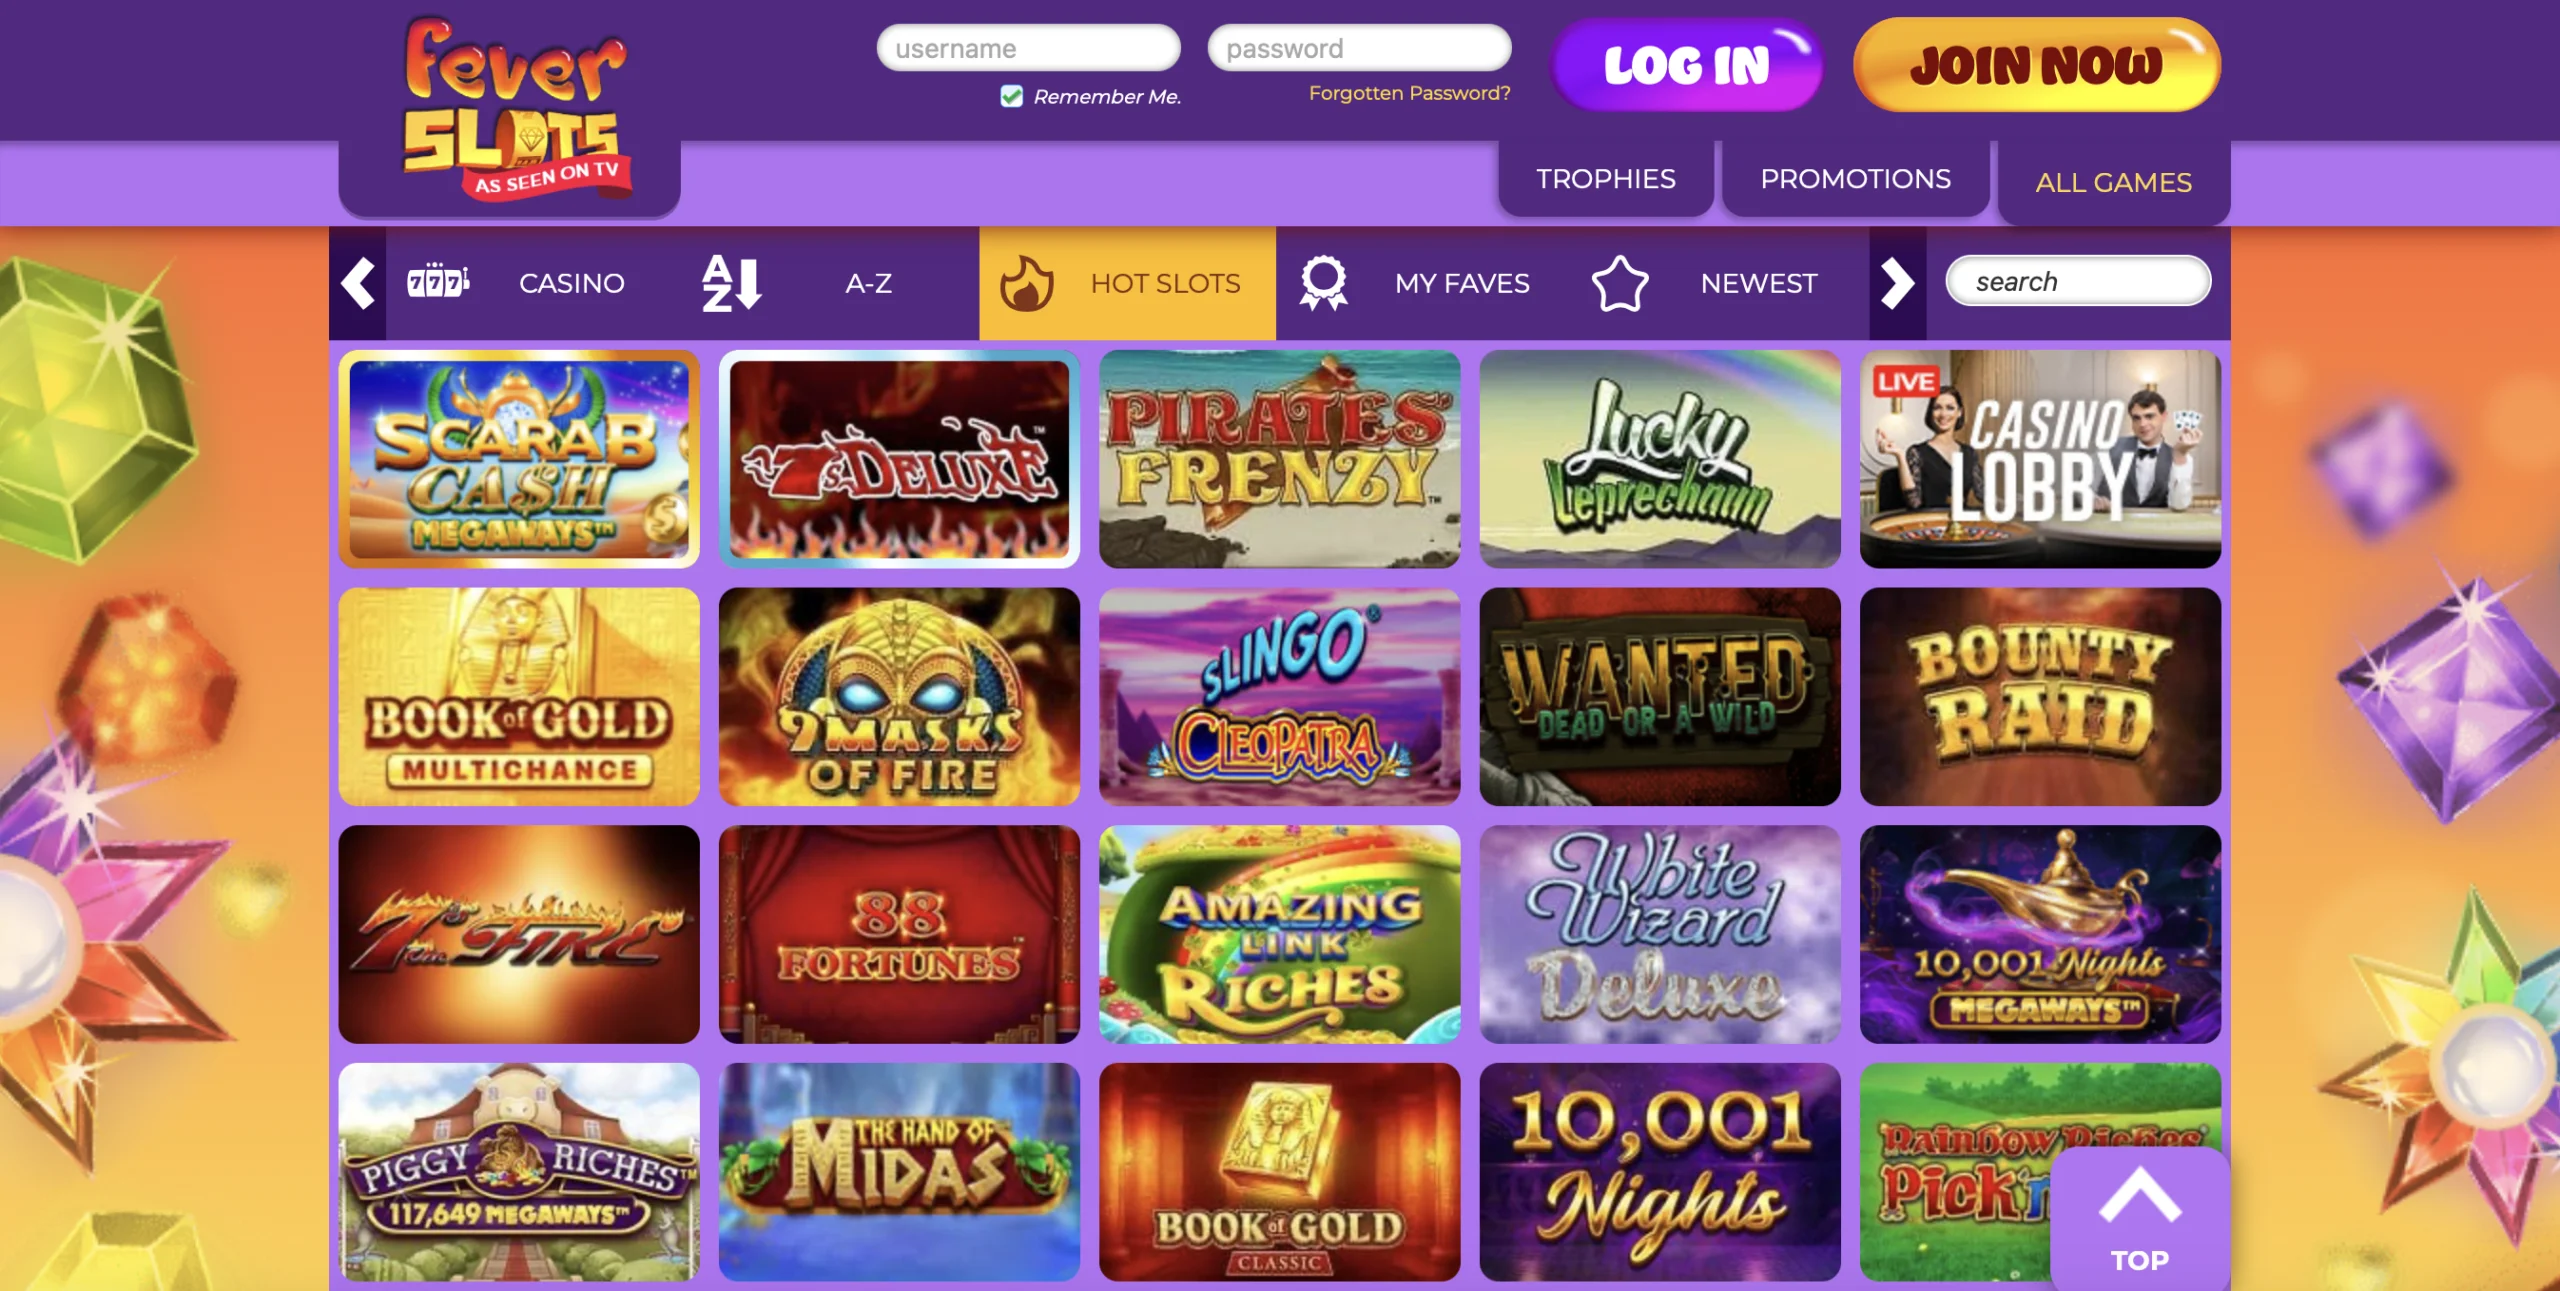 Fever Slots Game Selection